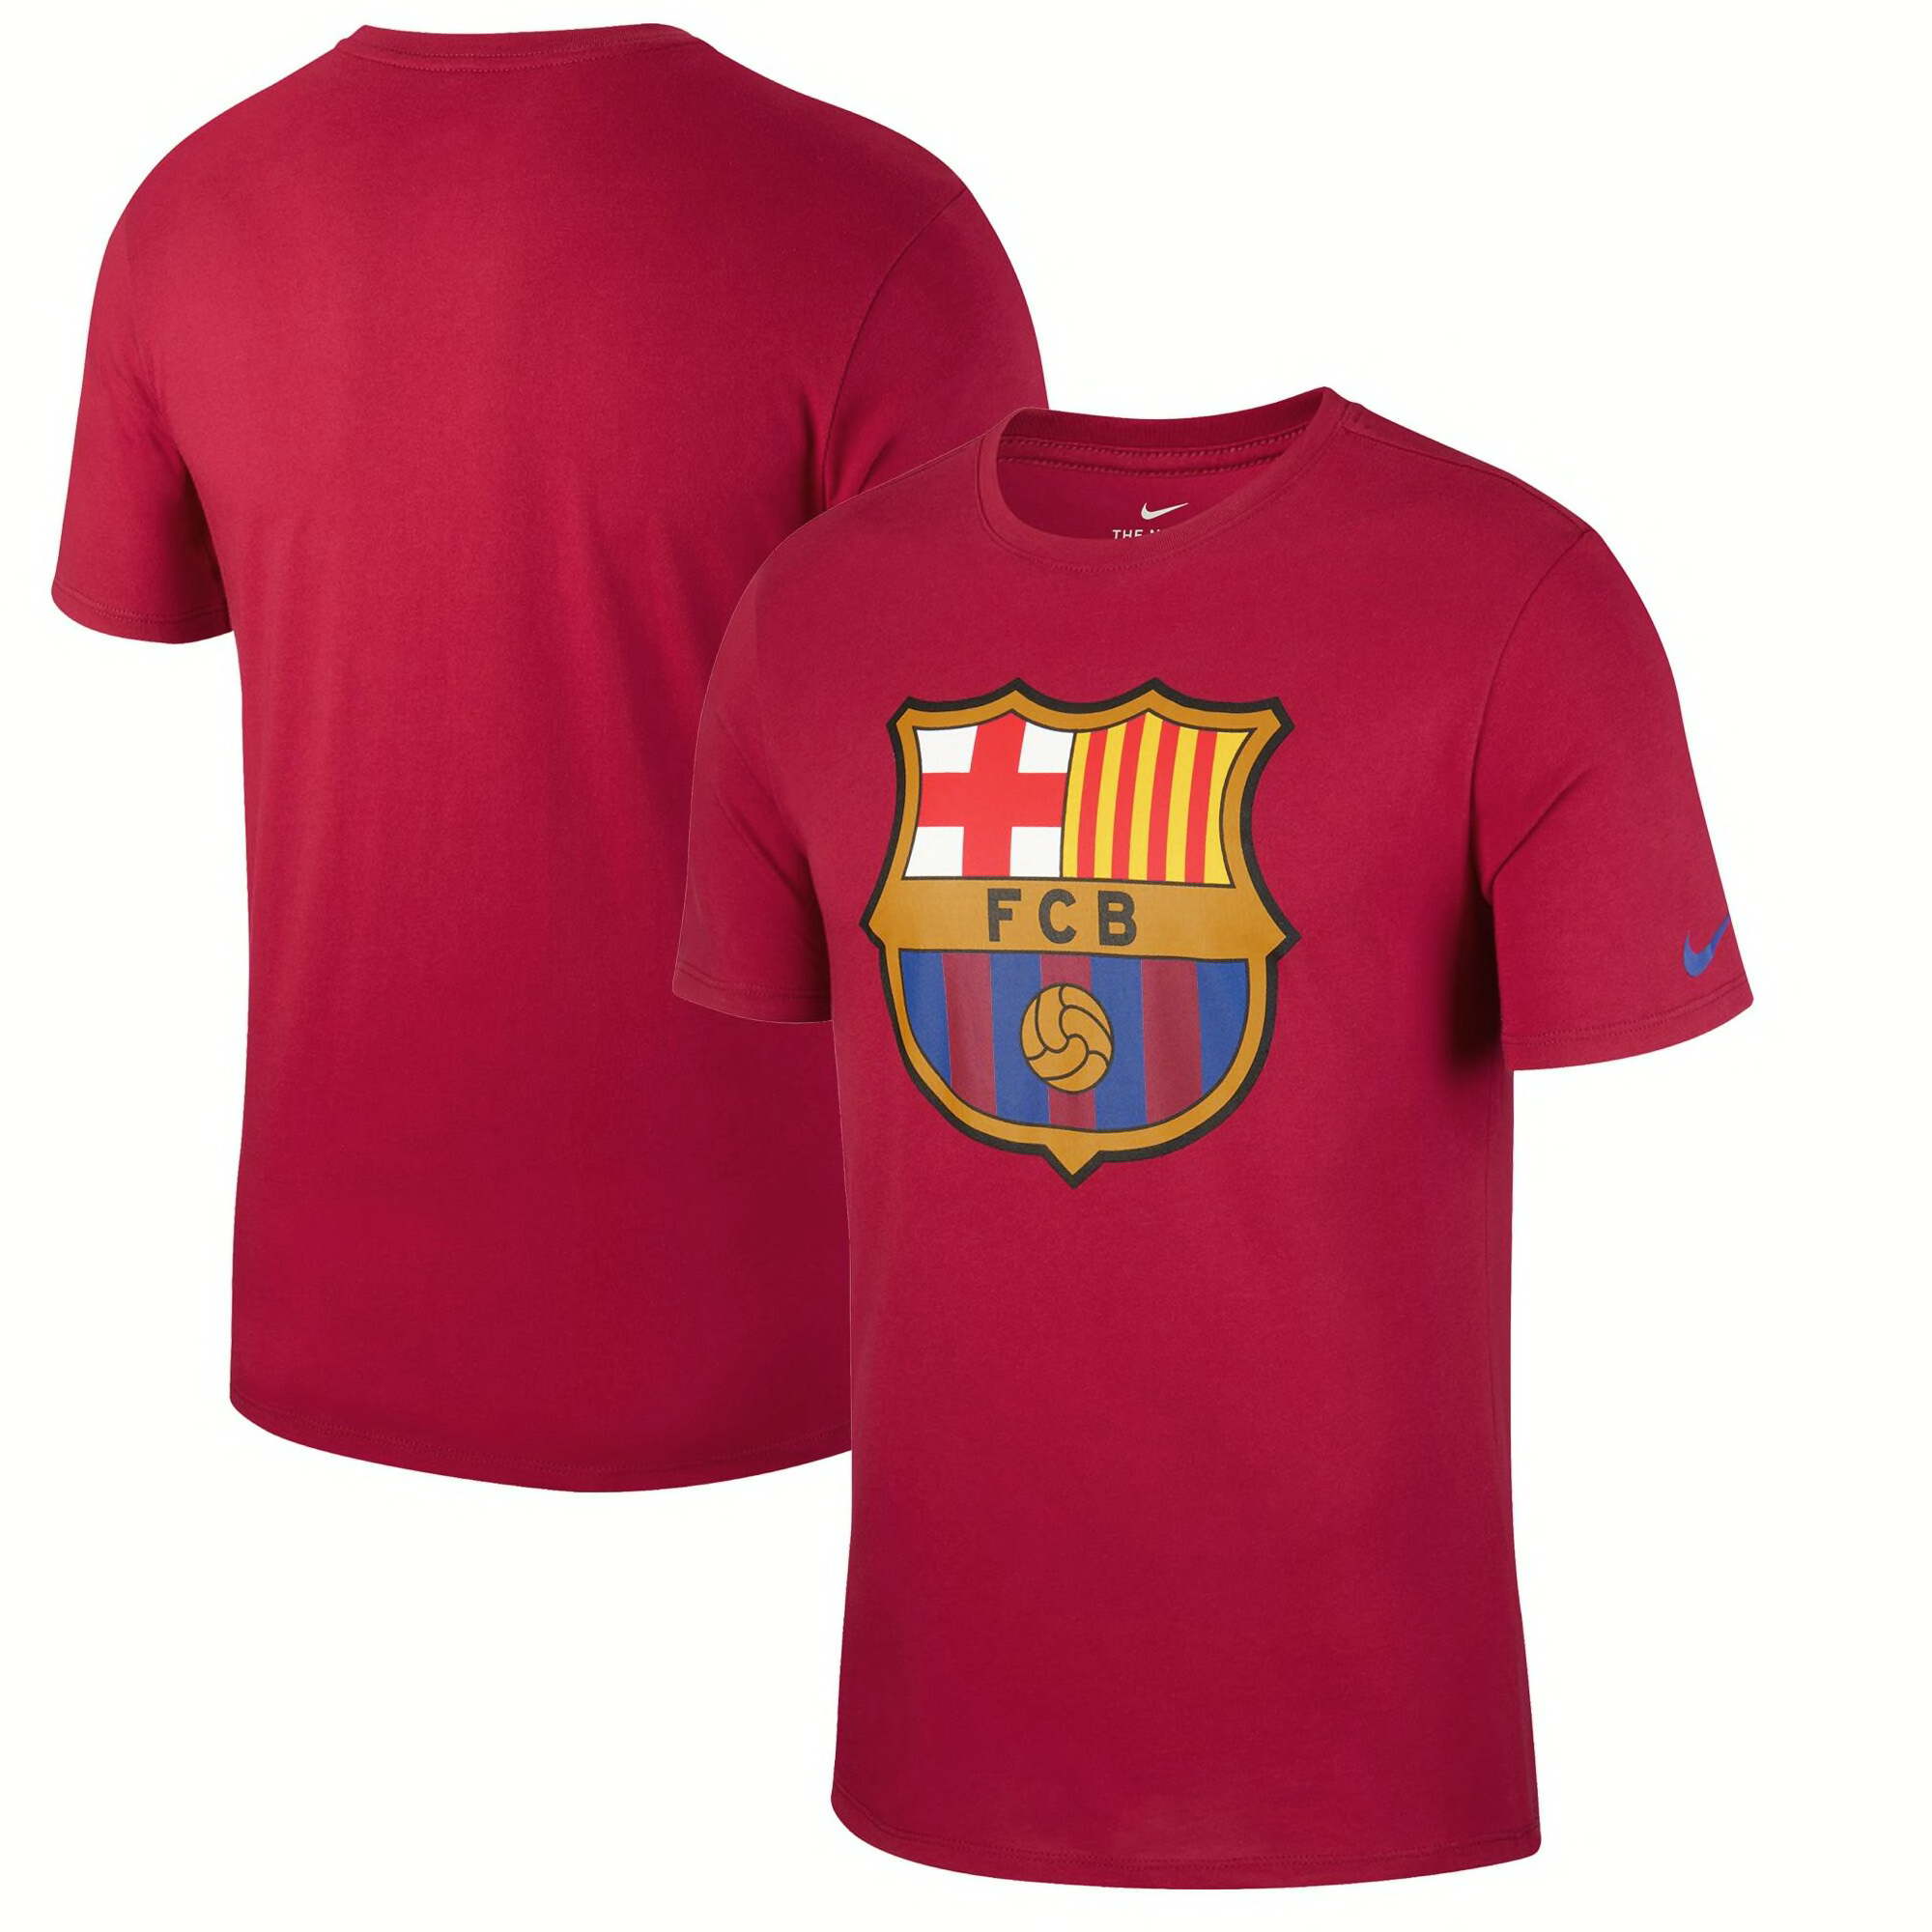 Summer must-haves for the Barcelona fan